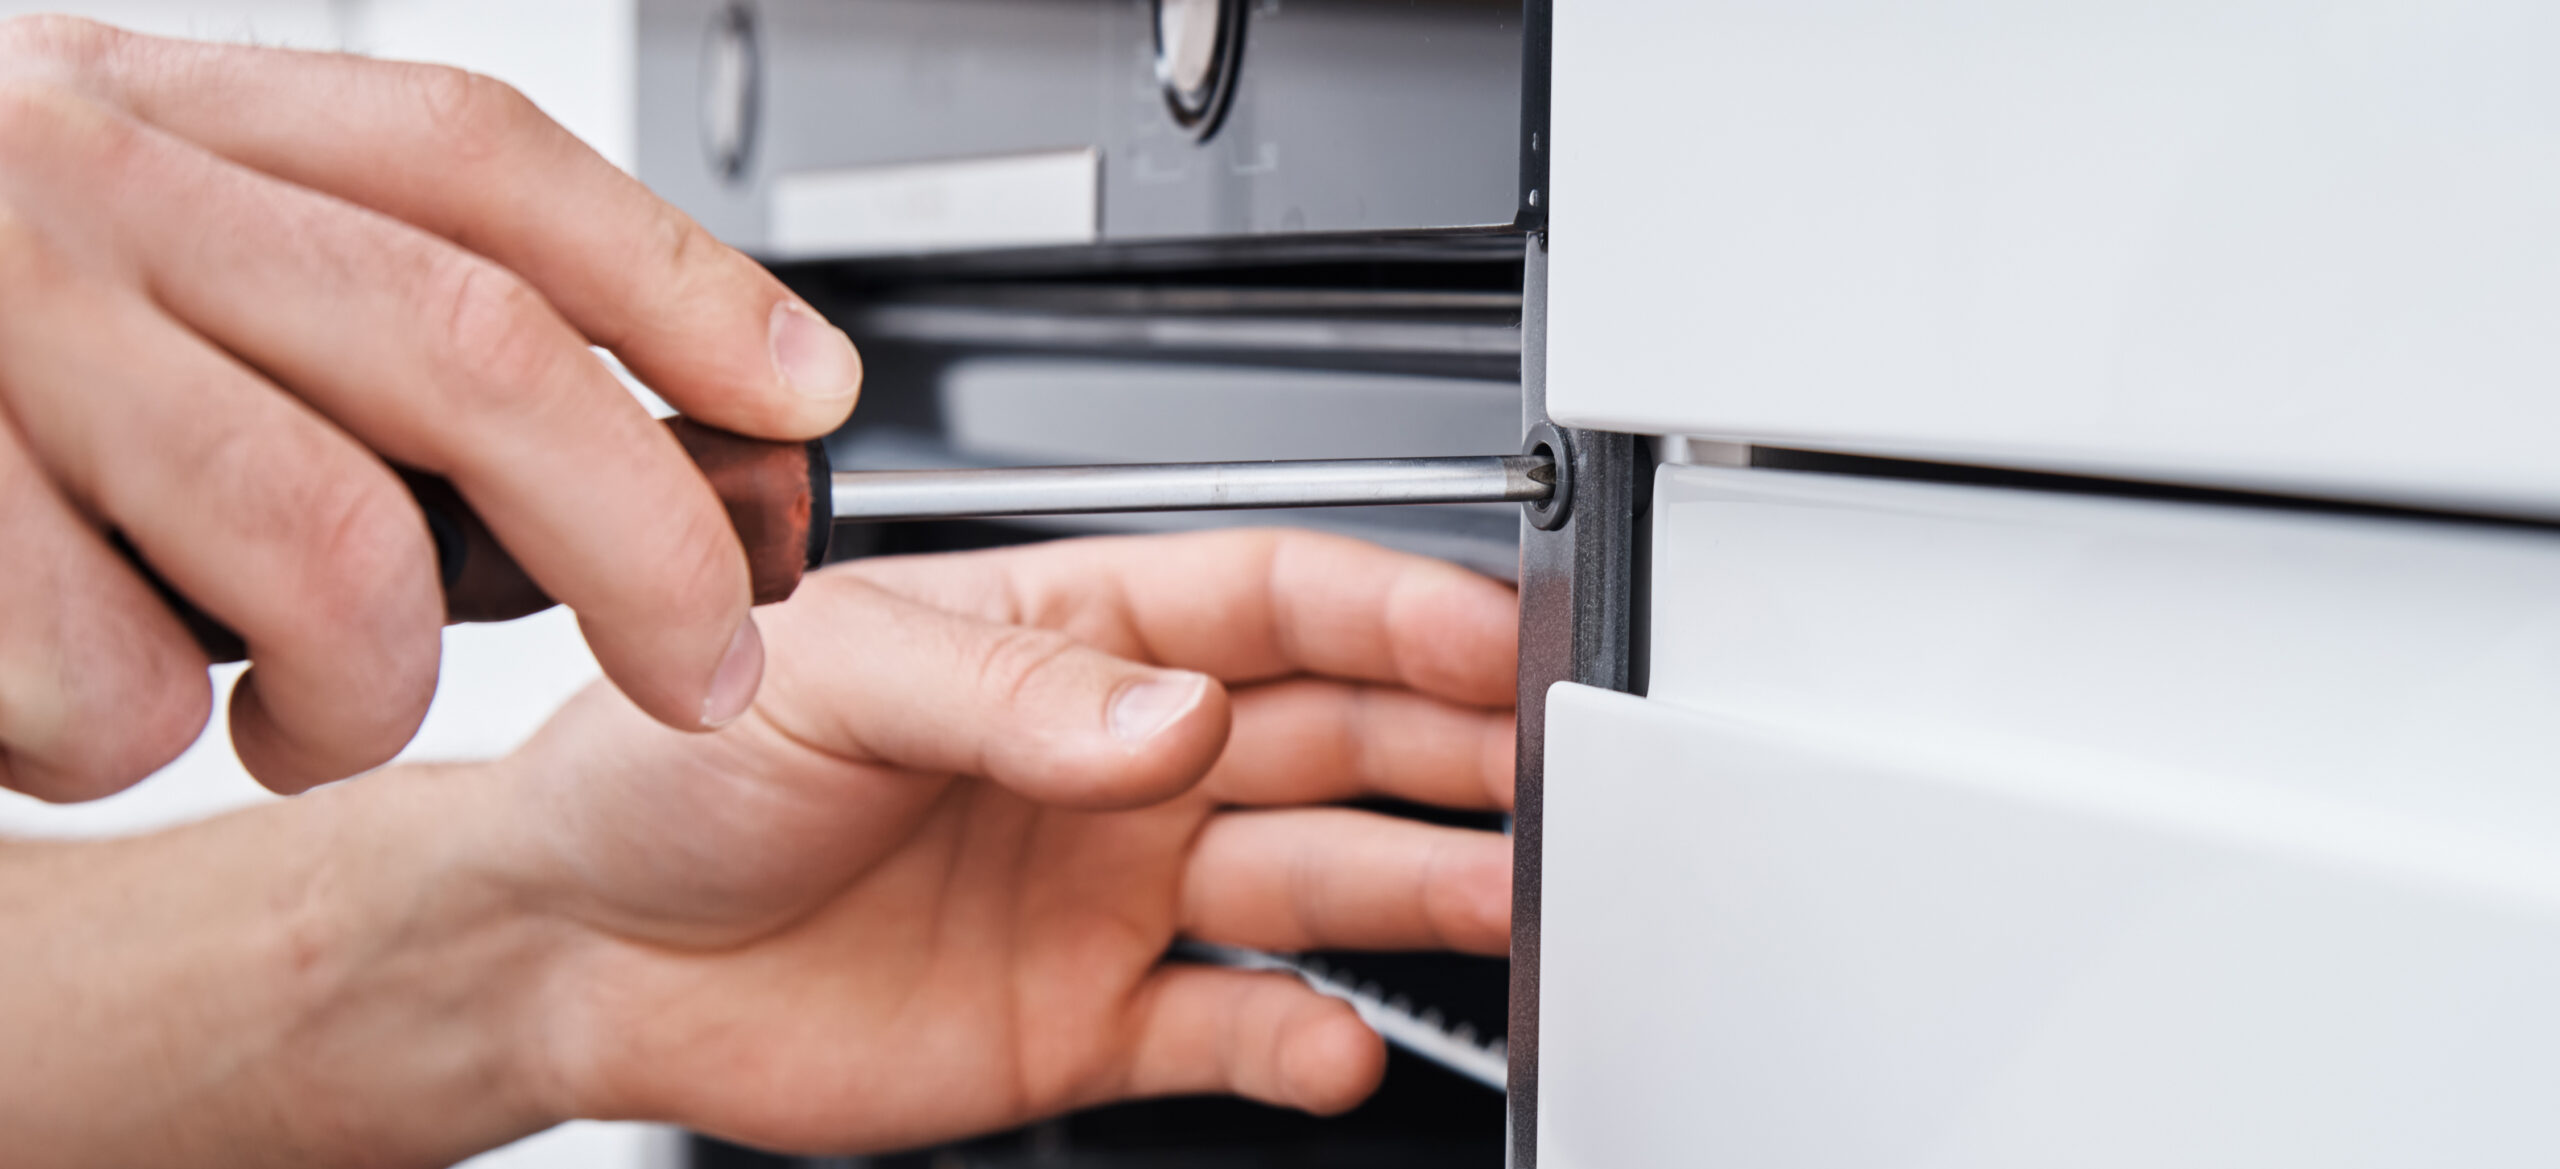 Typical problems when installing appliances